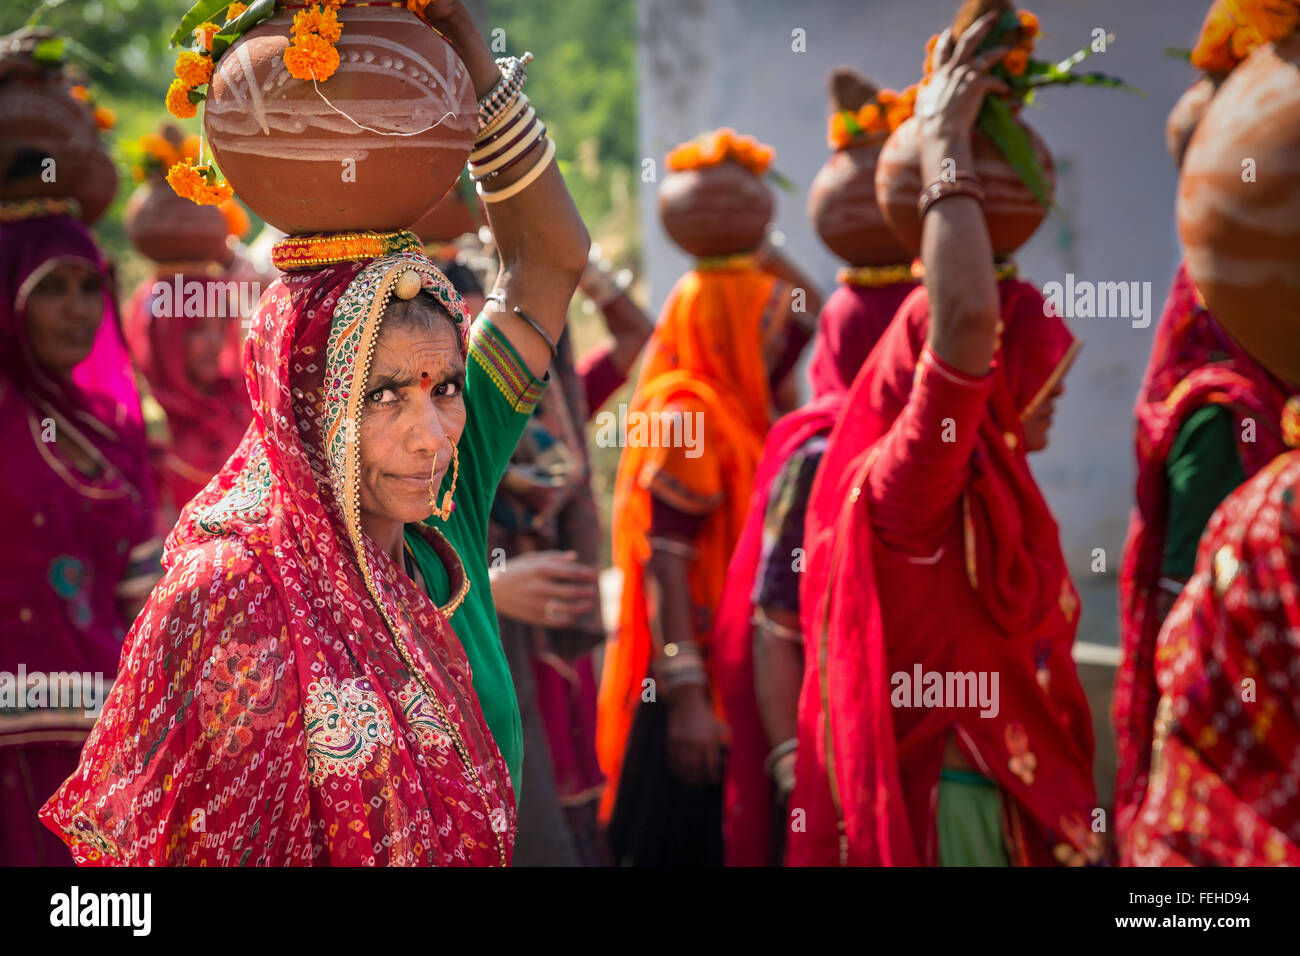 Indian women carrying offerings on their heads during a festival, Pushkar, Rajasthan, India Stock Photo